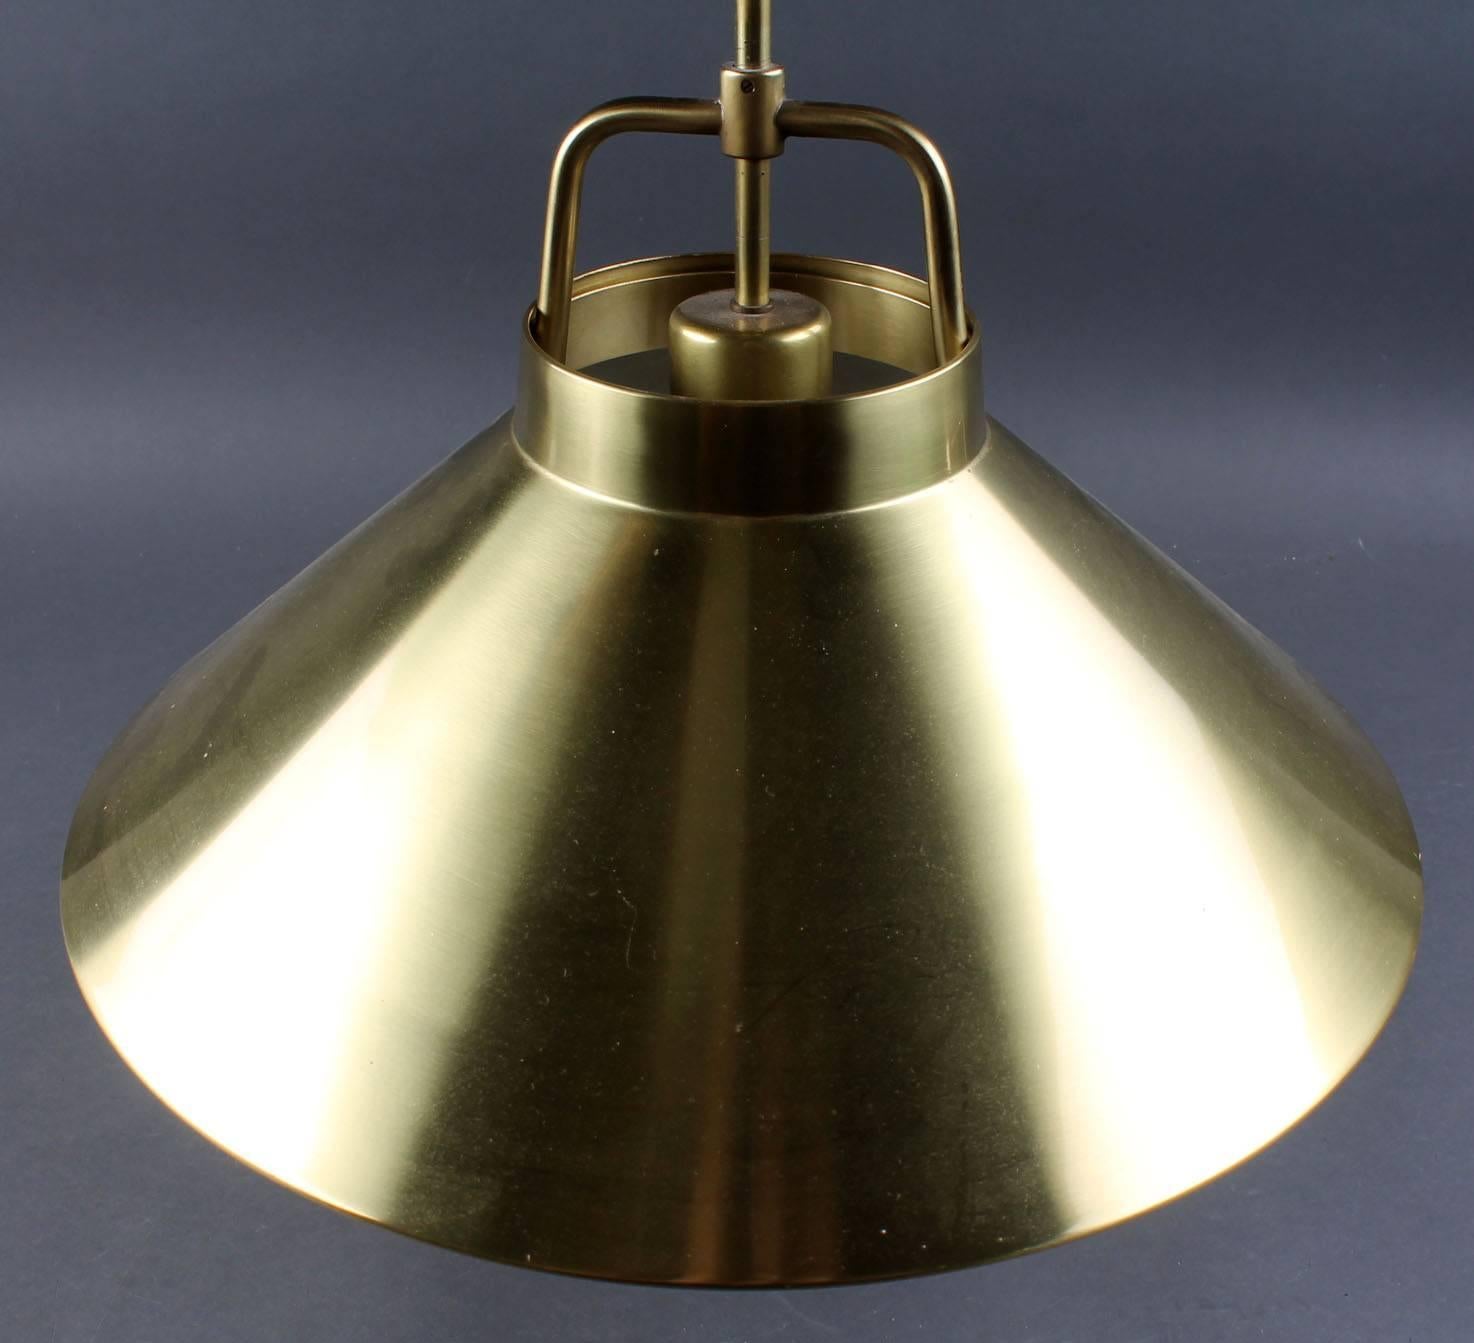 Brass pendants designed by Frits Schlegel and produced by Lyfa in the mid-1960s. Brass mounting bracket with adjustable height. Model P 295.
Measures: H. 27 cm. Ø 44 cm. 
Two pieces available.